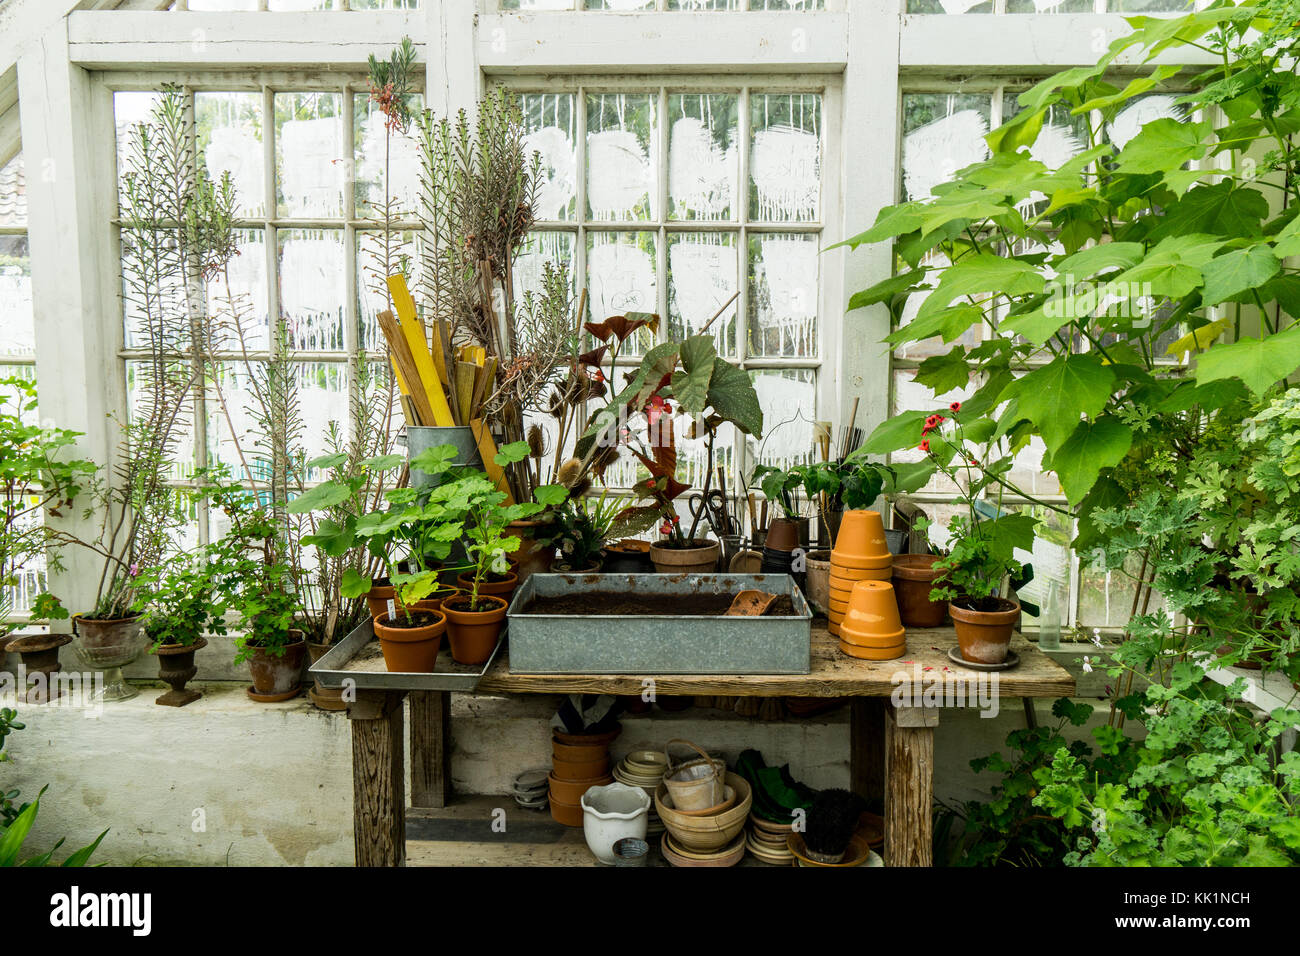 romantic idyllic plant table in the green house with old retro flower pot pots, garden tools and plants Stock Photo